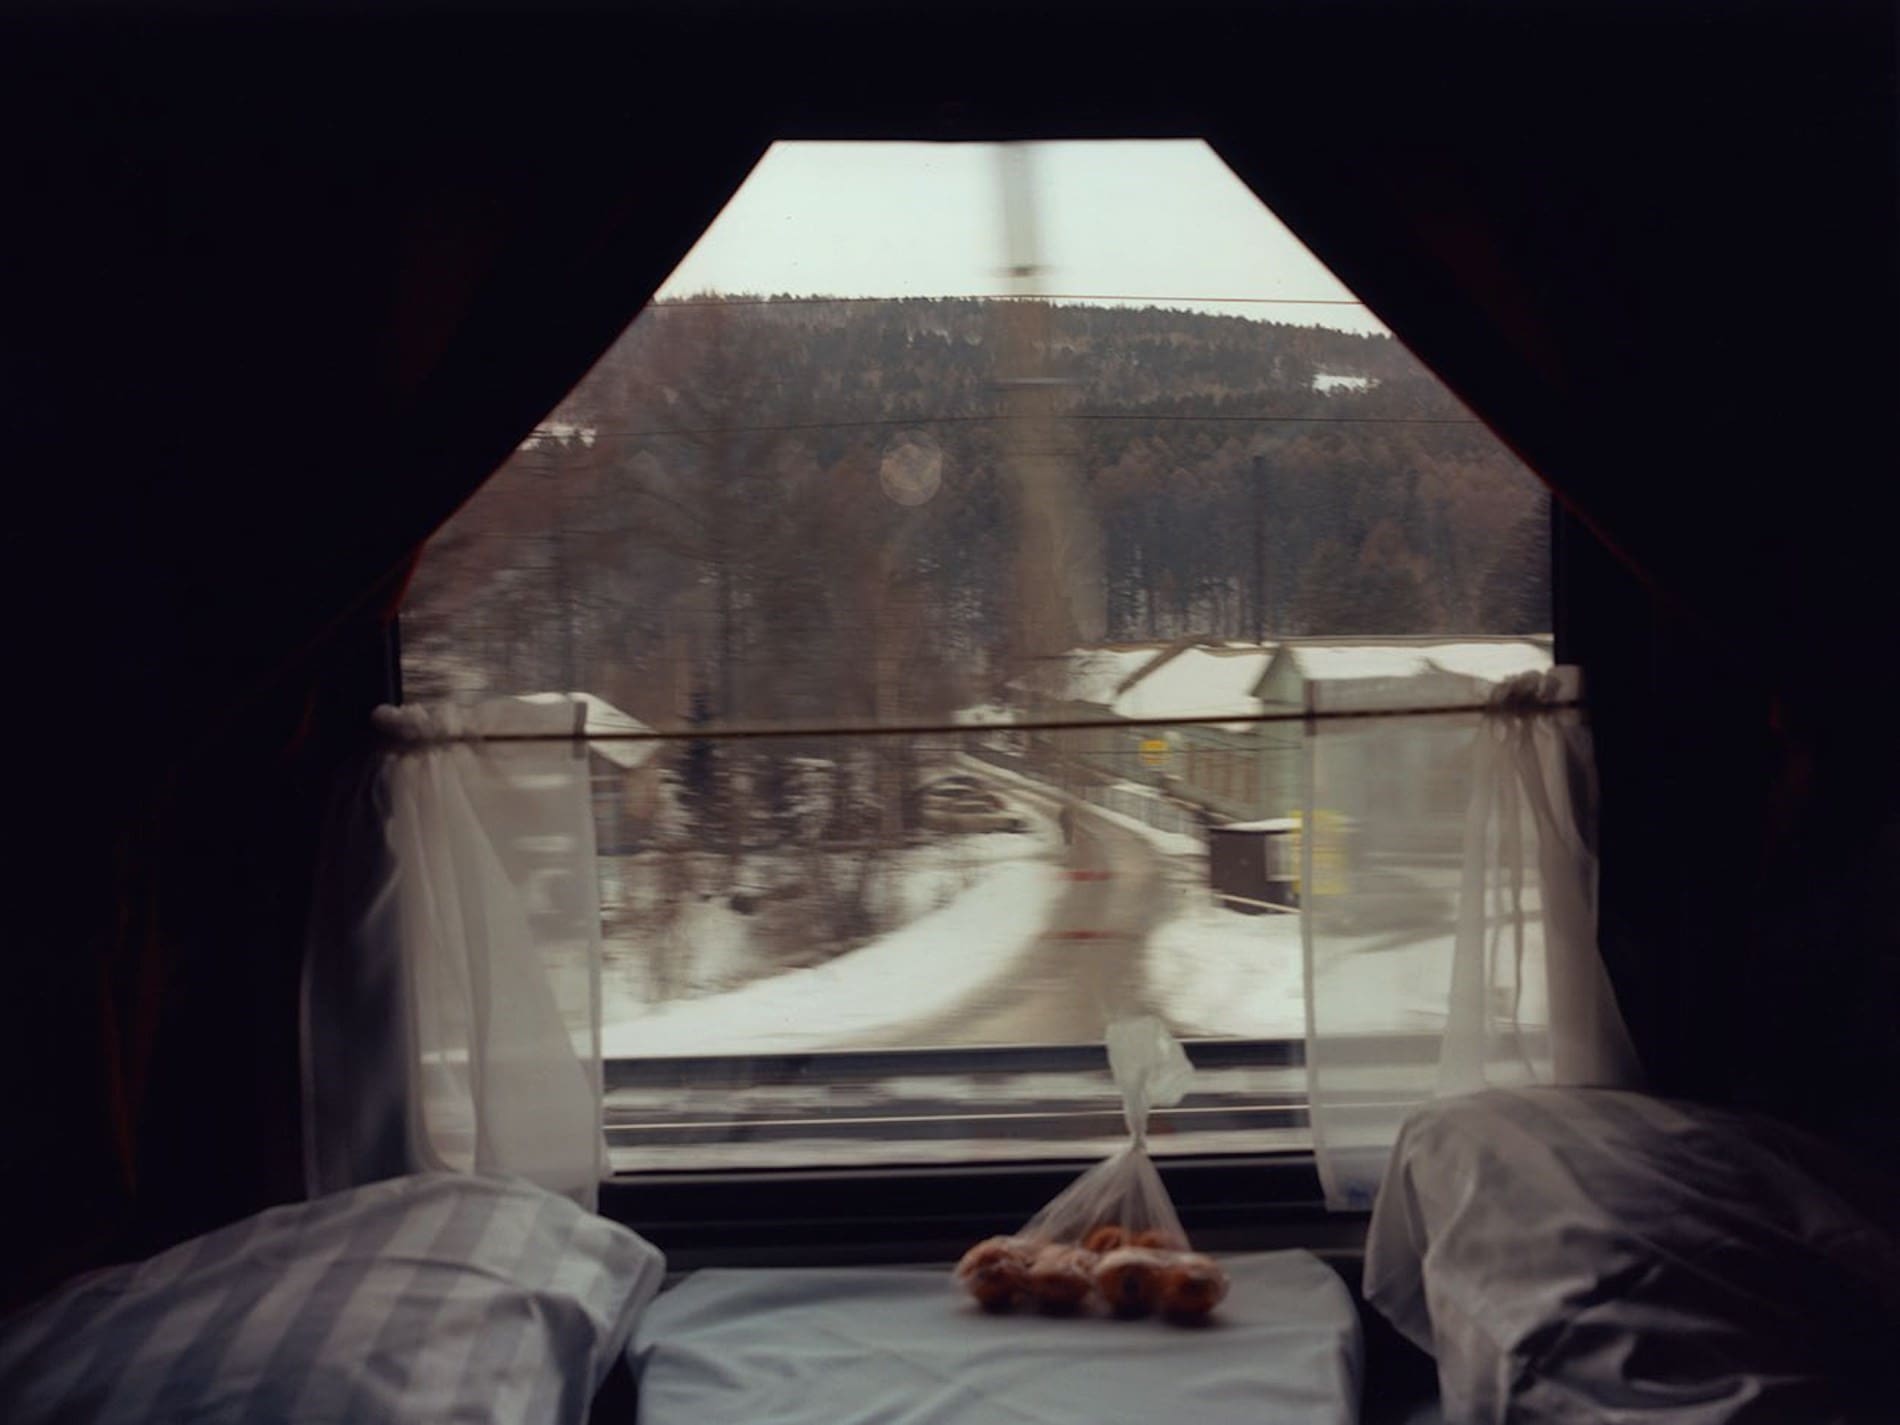 Coco Capitan, Transsiberian | A window by a table seat on a train, with a bag of fruit and looking out at a snow-covered village